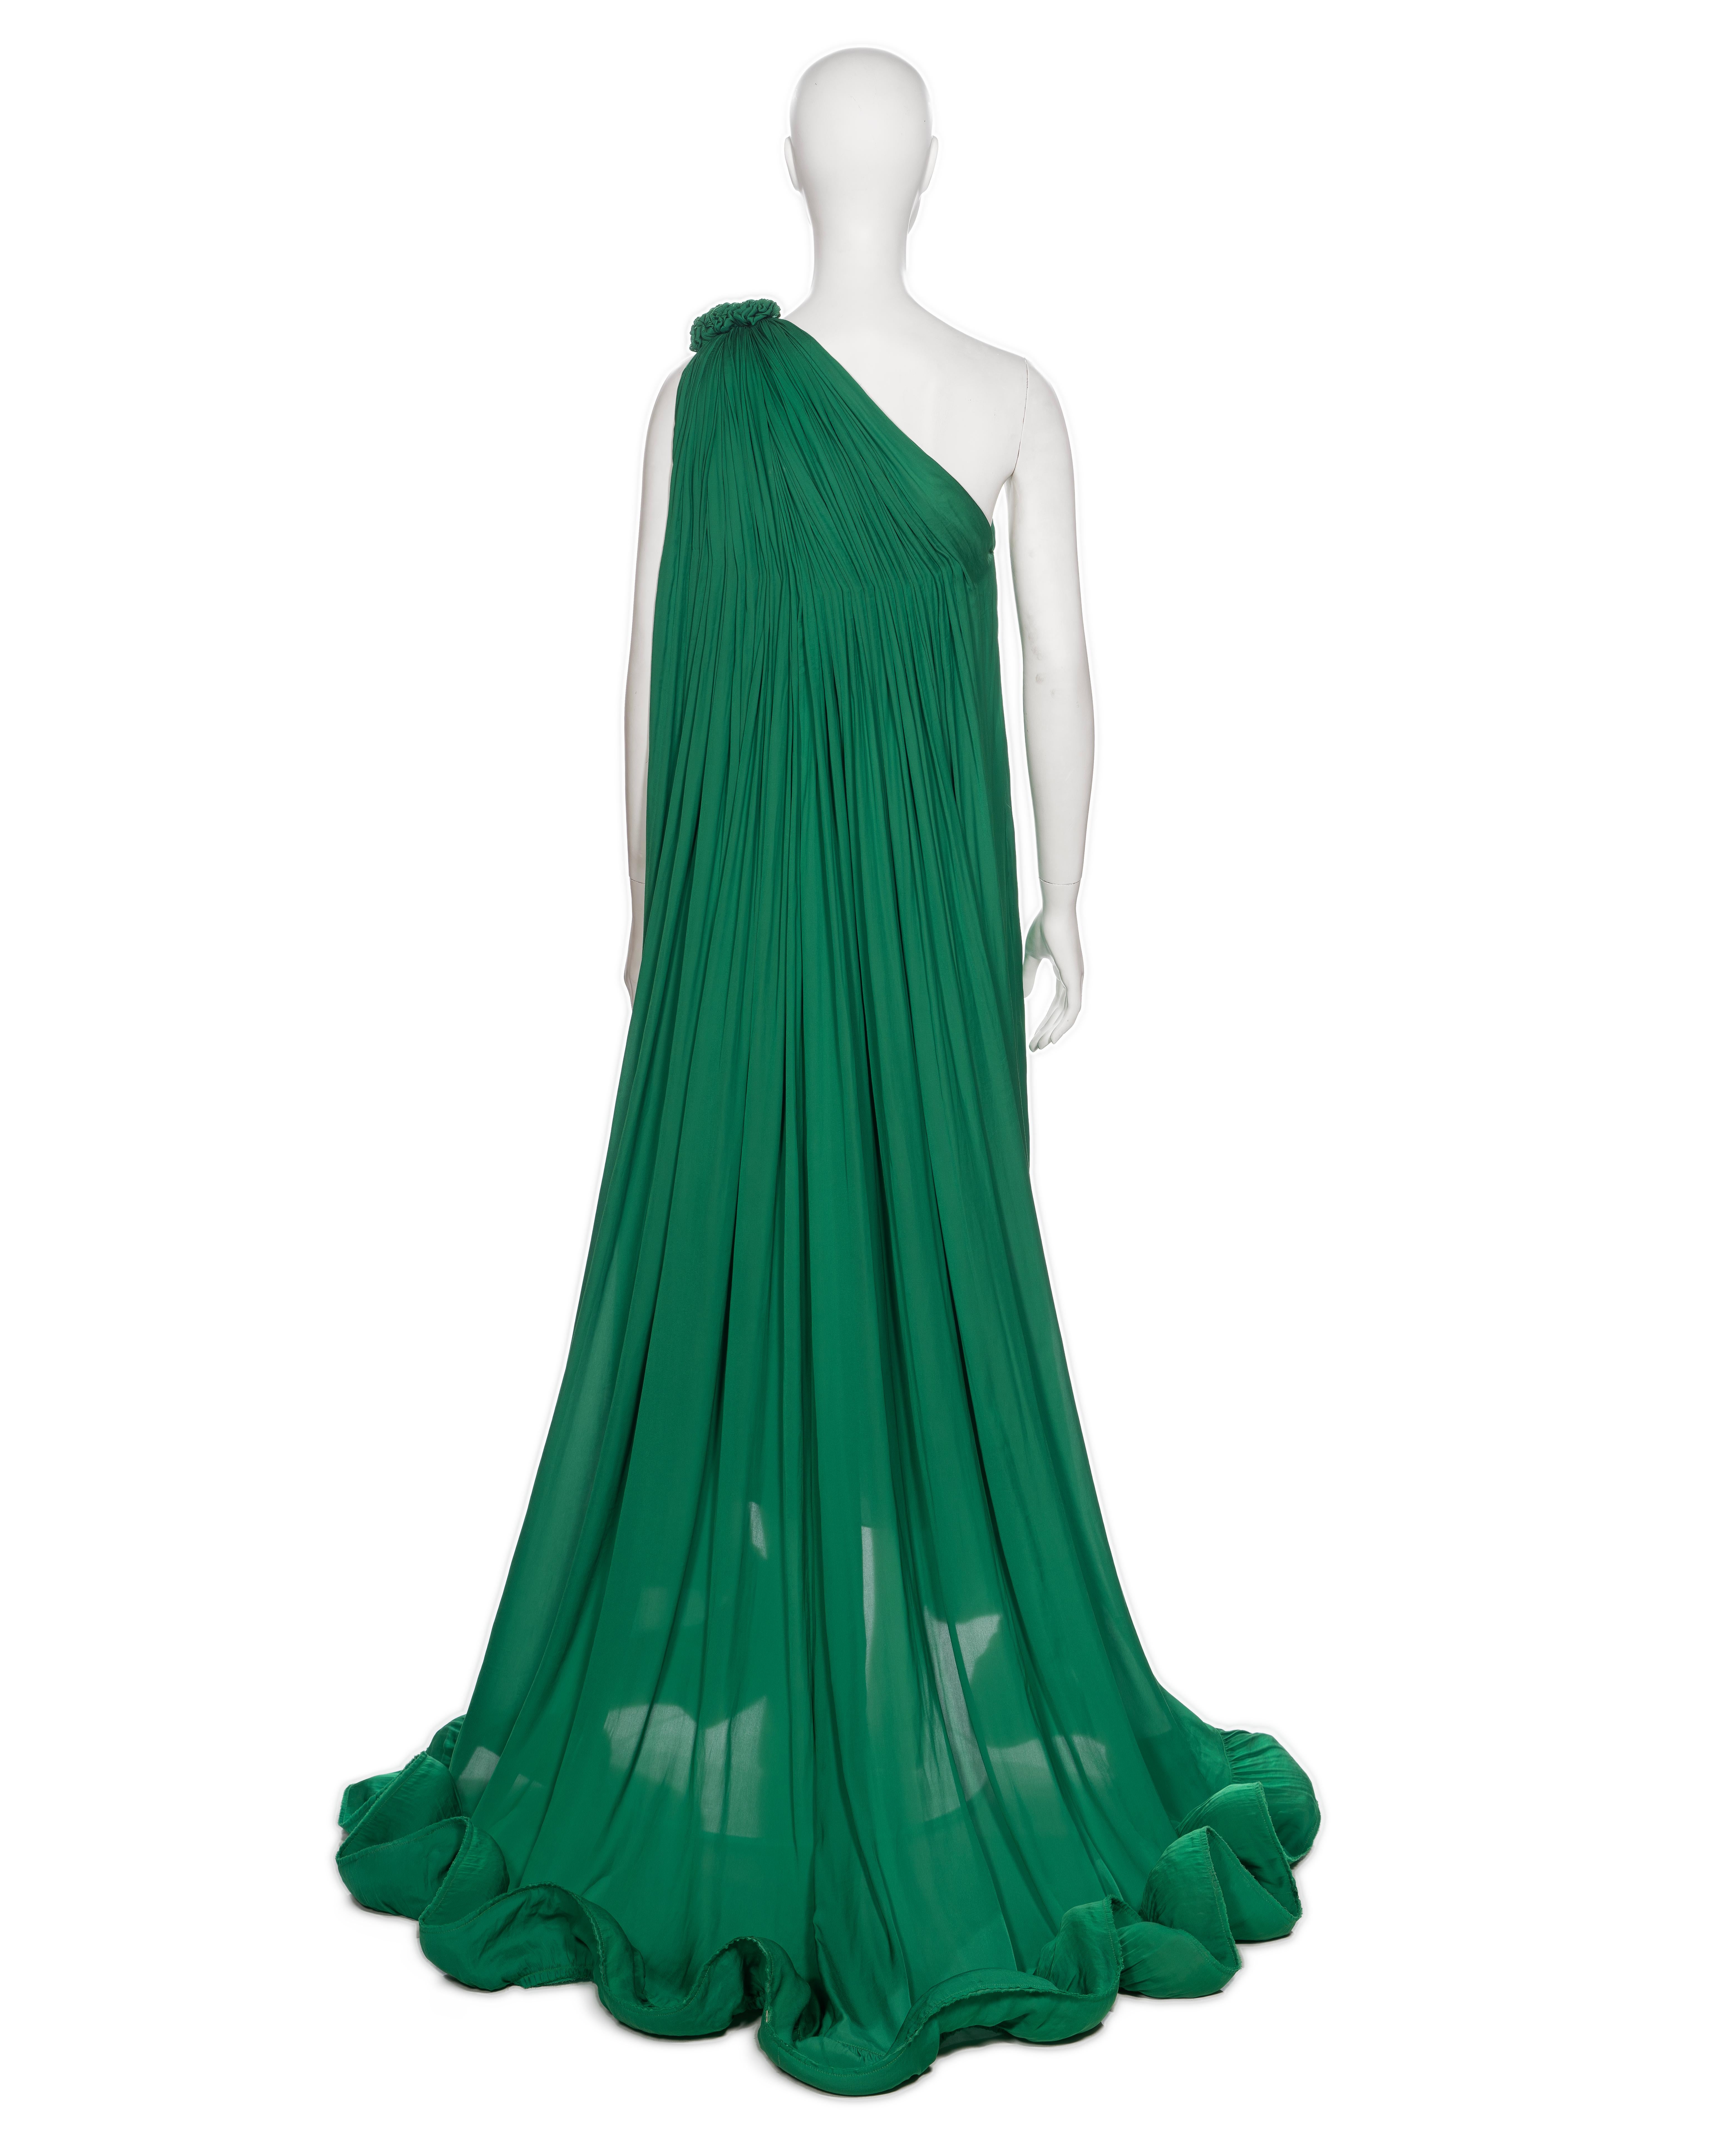 Lanvin by Alber Elbaz Green Pleated One-Shoulder Evening Dress, SS 2008 For Sale 4